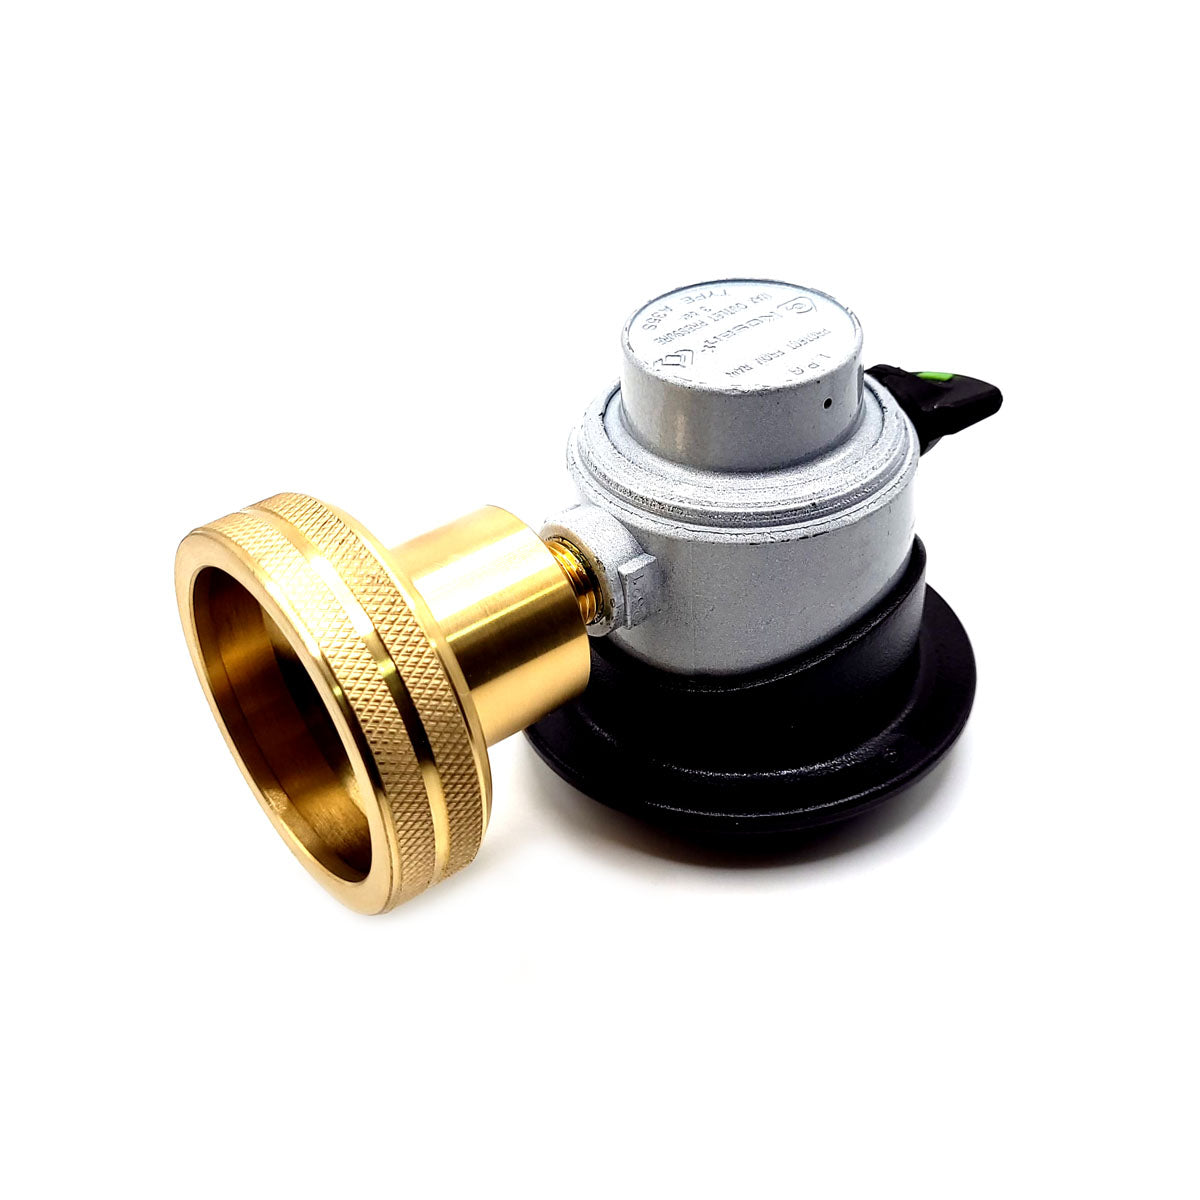 35mm JUMBO Clip On Type Adapter for Propane Butane Gas Bottles Cylinders with DISH Adaptor